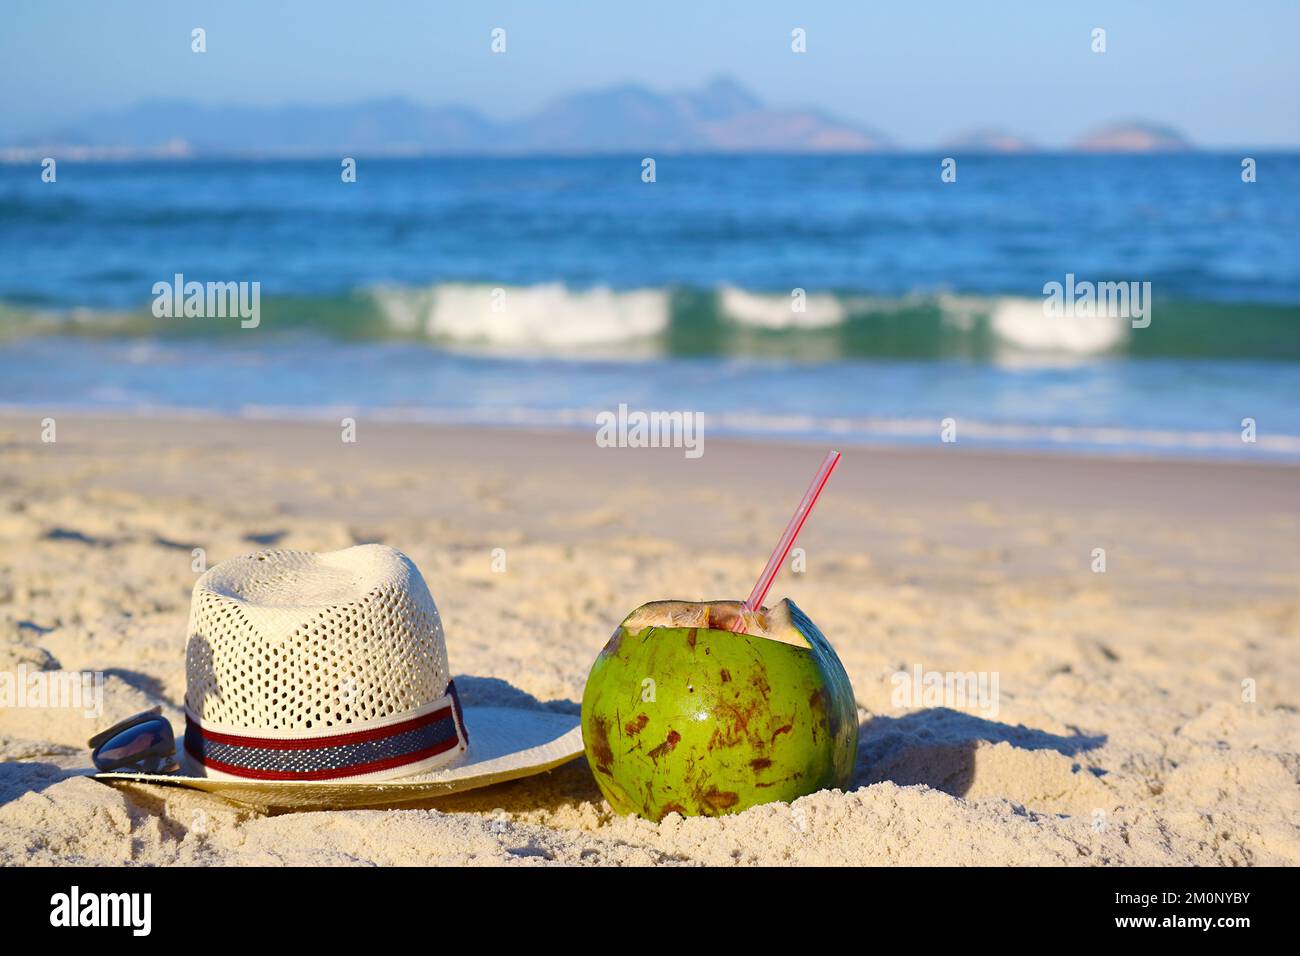 Fresh young coconut with Straw hat and sunglasses on the sandy beach of Copacabana, Rio de Janeiro, Brazil, South America Stock Photo